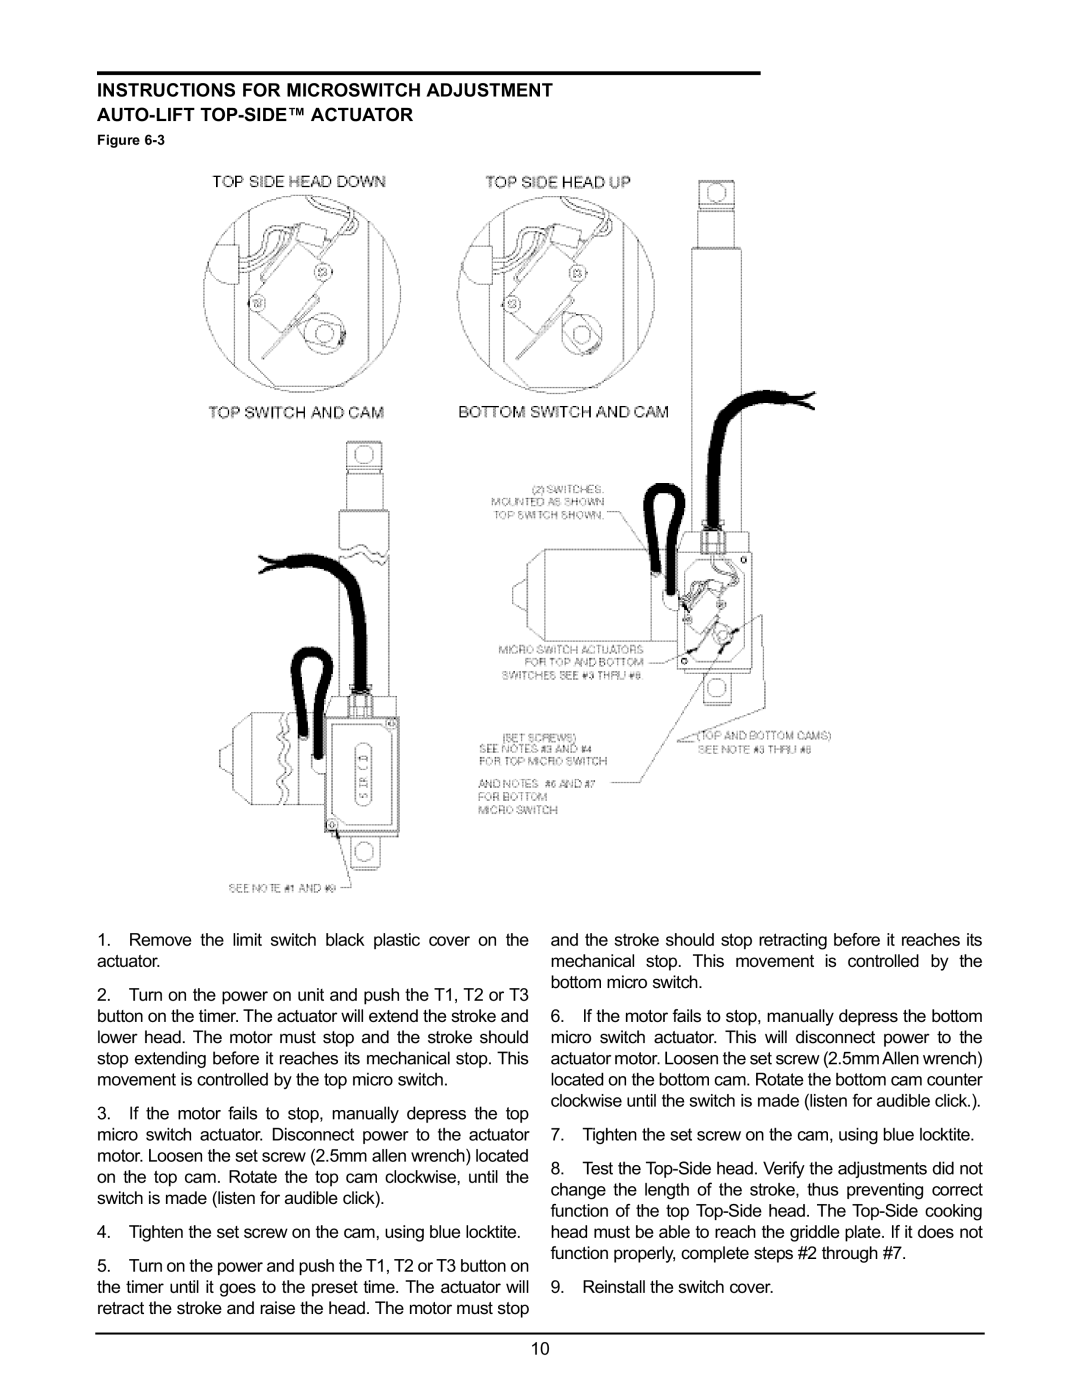 Keating Of Chicago 028951 service manual Instructions For Microswitch Adjustment Auto-Lift Top-Side Actuator 